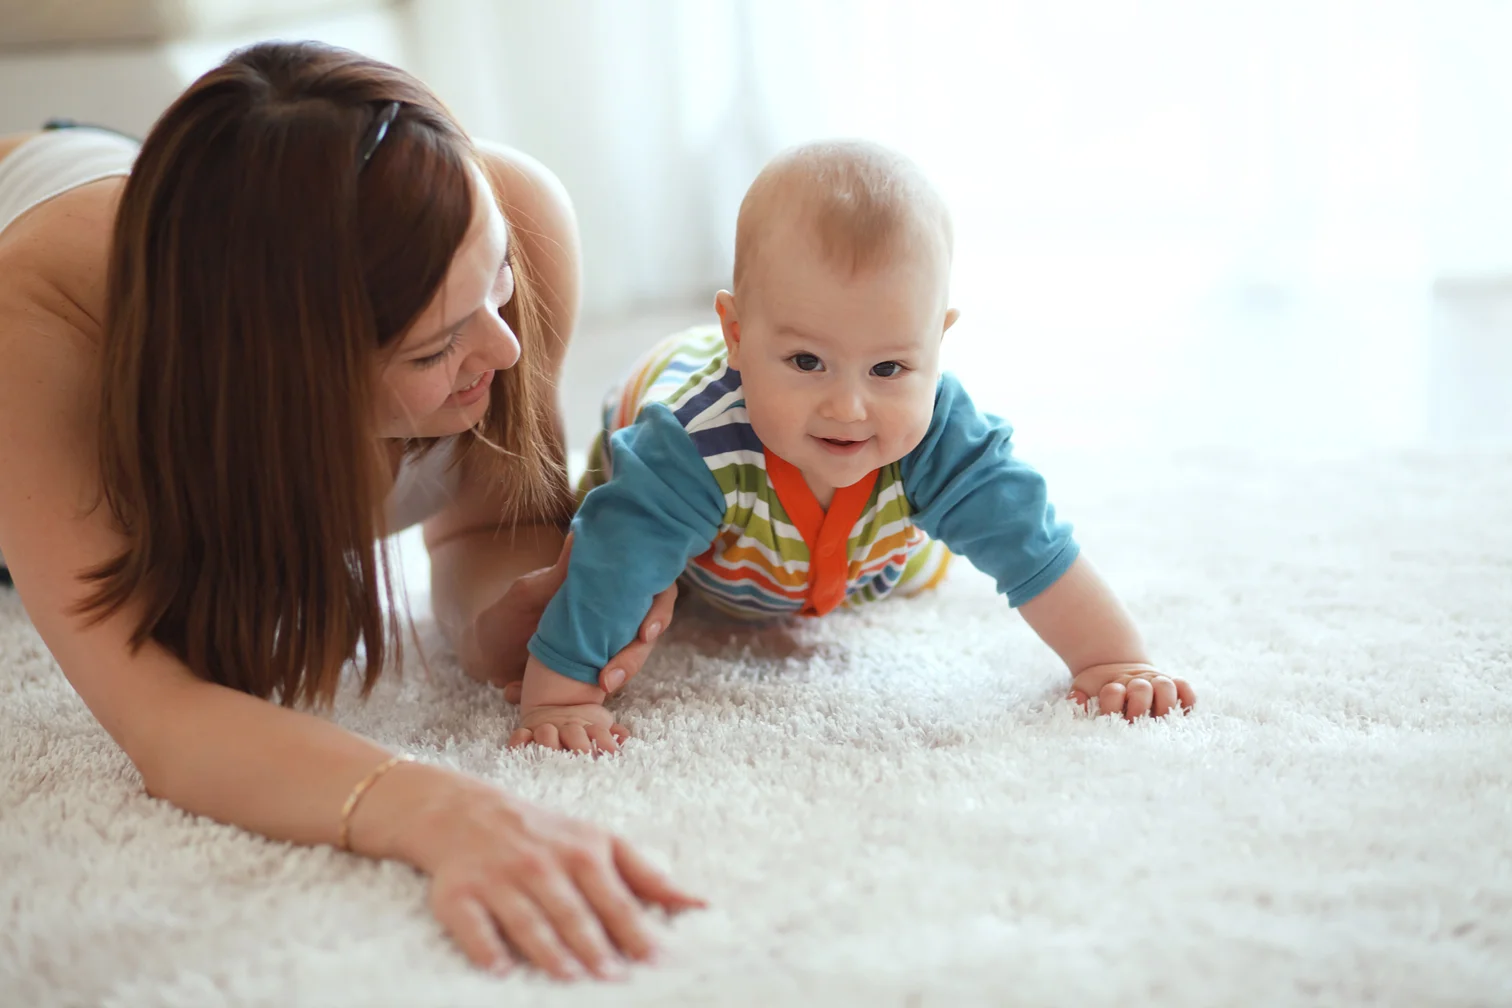 professional carpet cleaning services by Clean Pros